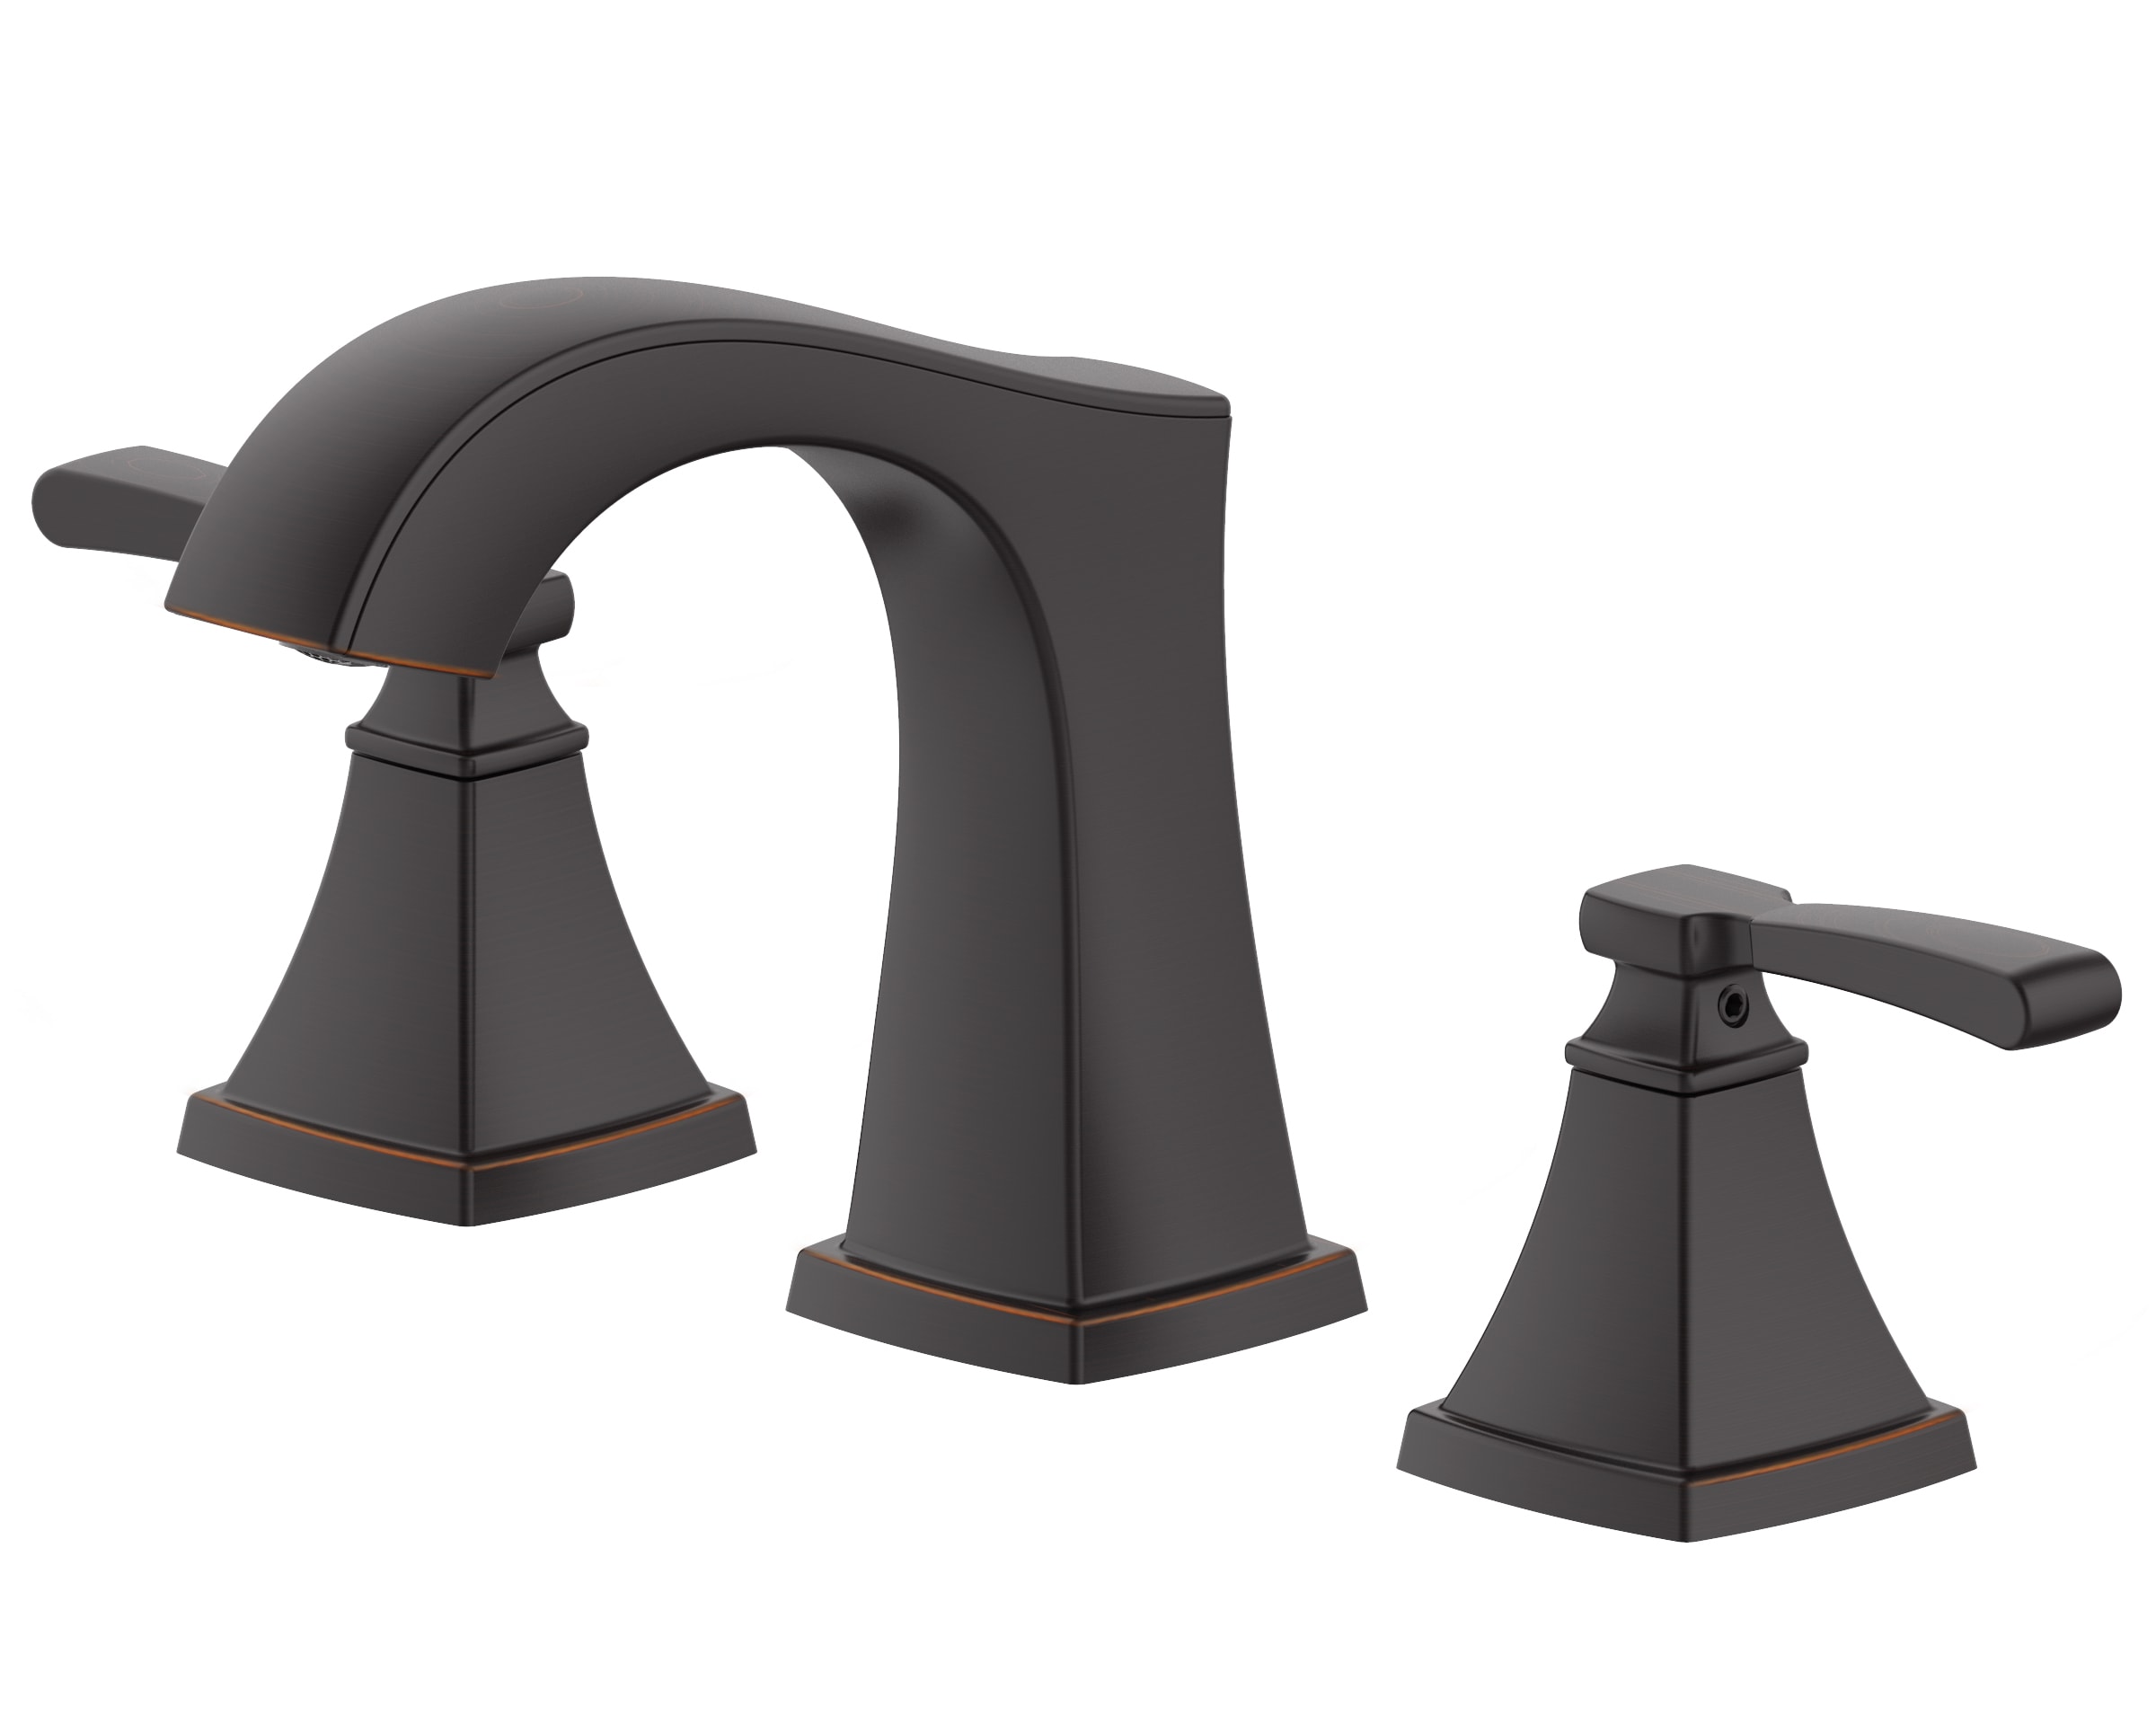 allen + roth Chesler Oil Rubbed Bronze Widespread 2-Handle WaterSense Bathroom Sink Faucet with Drain